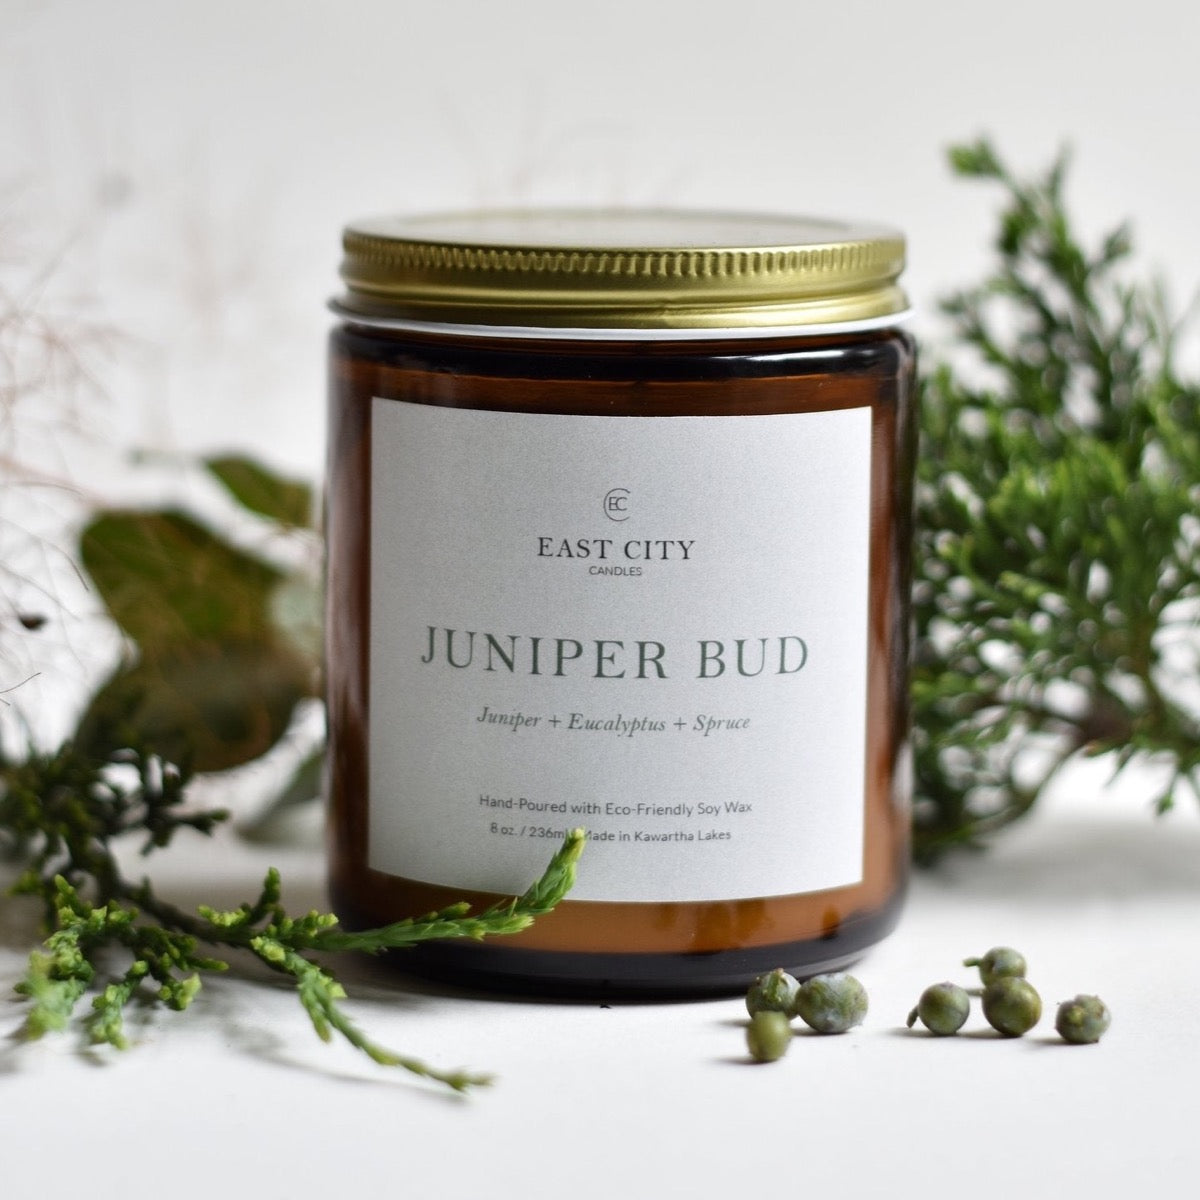 Juniper Bud Candle styled with greenery. Styled view.